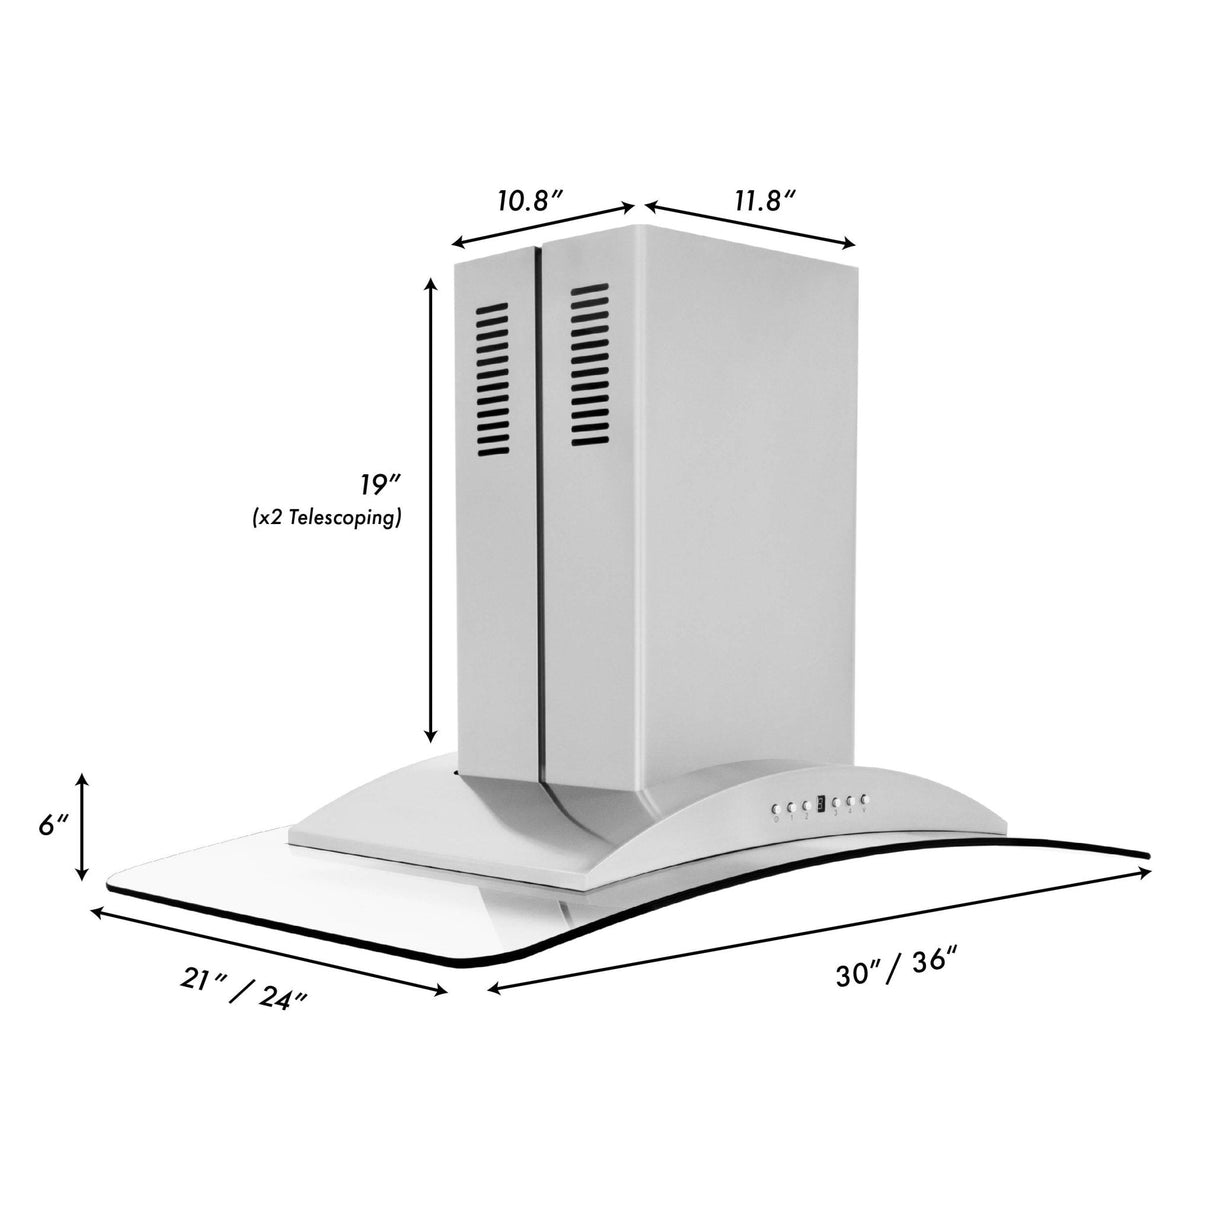 ZLINE Convertible Vent Island Mount Range Hood in Stainless Steel and Glass (GL9i)